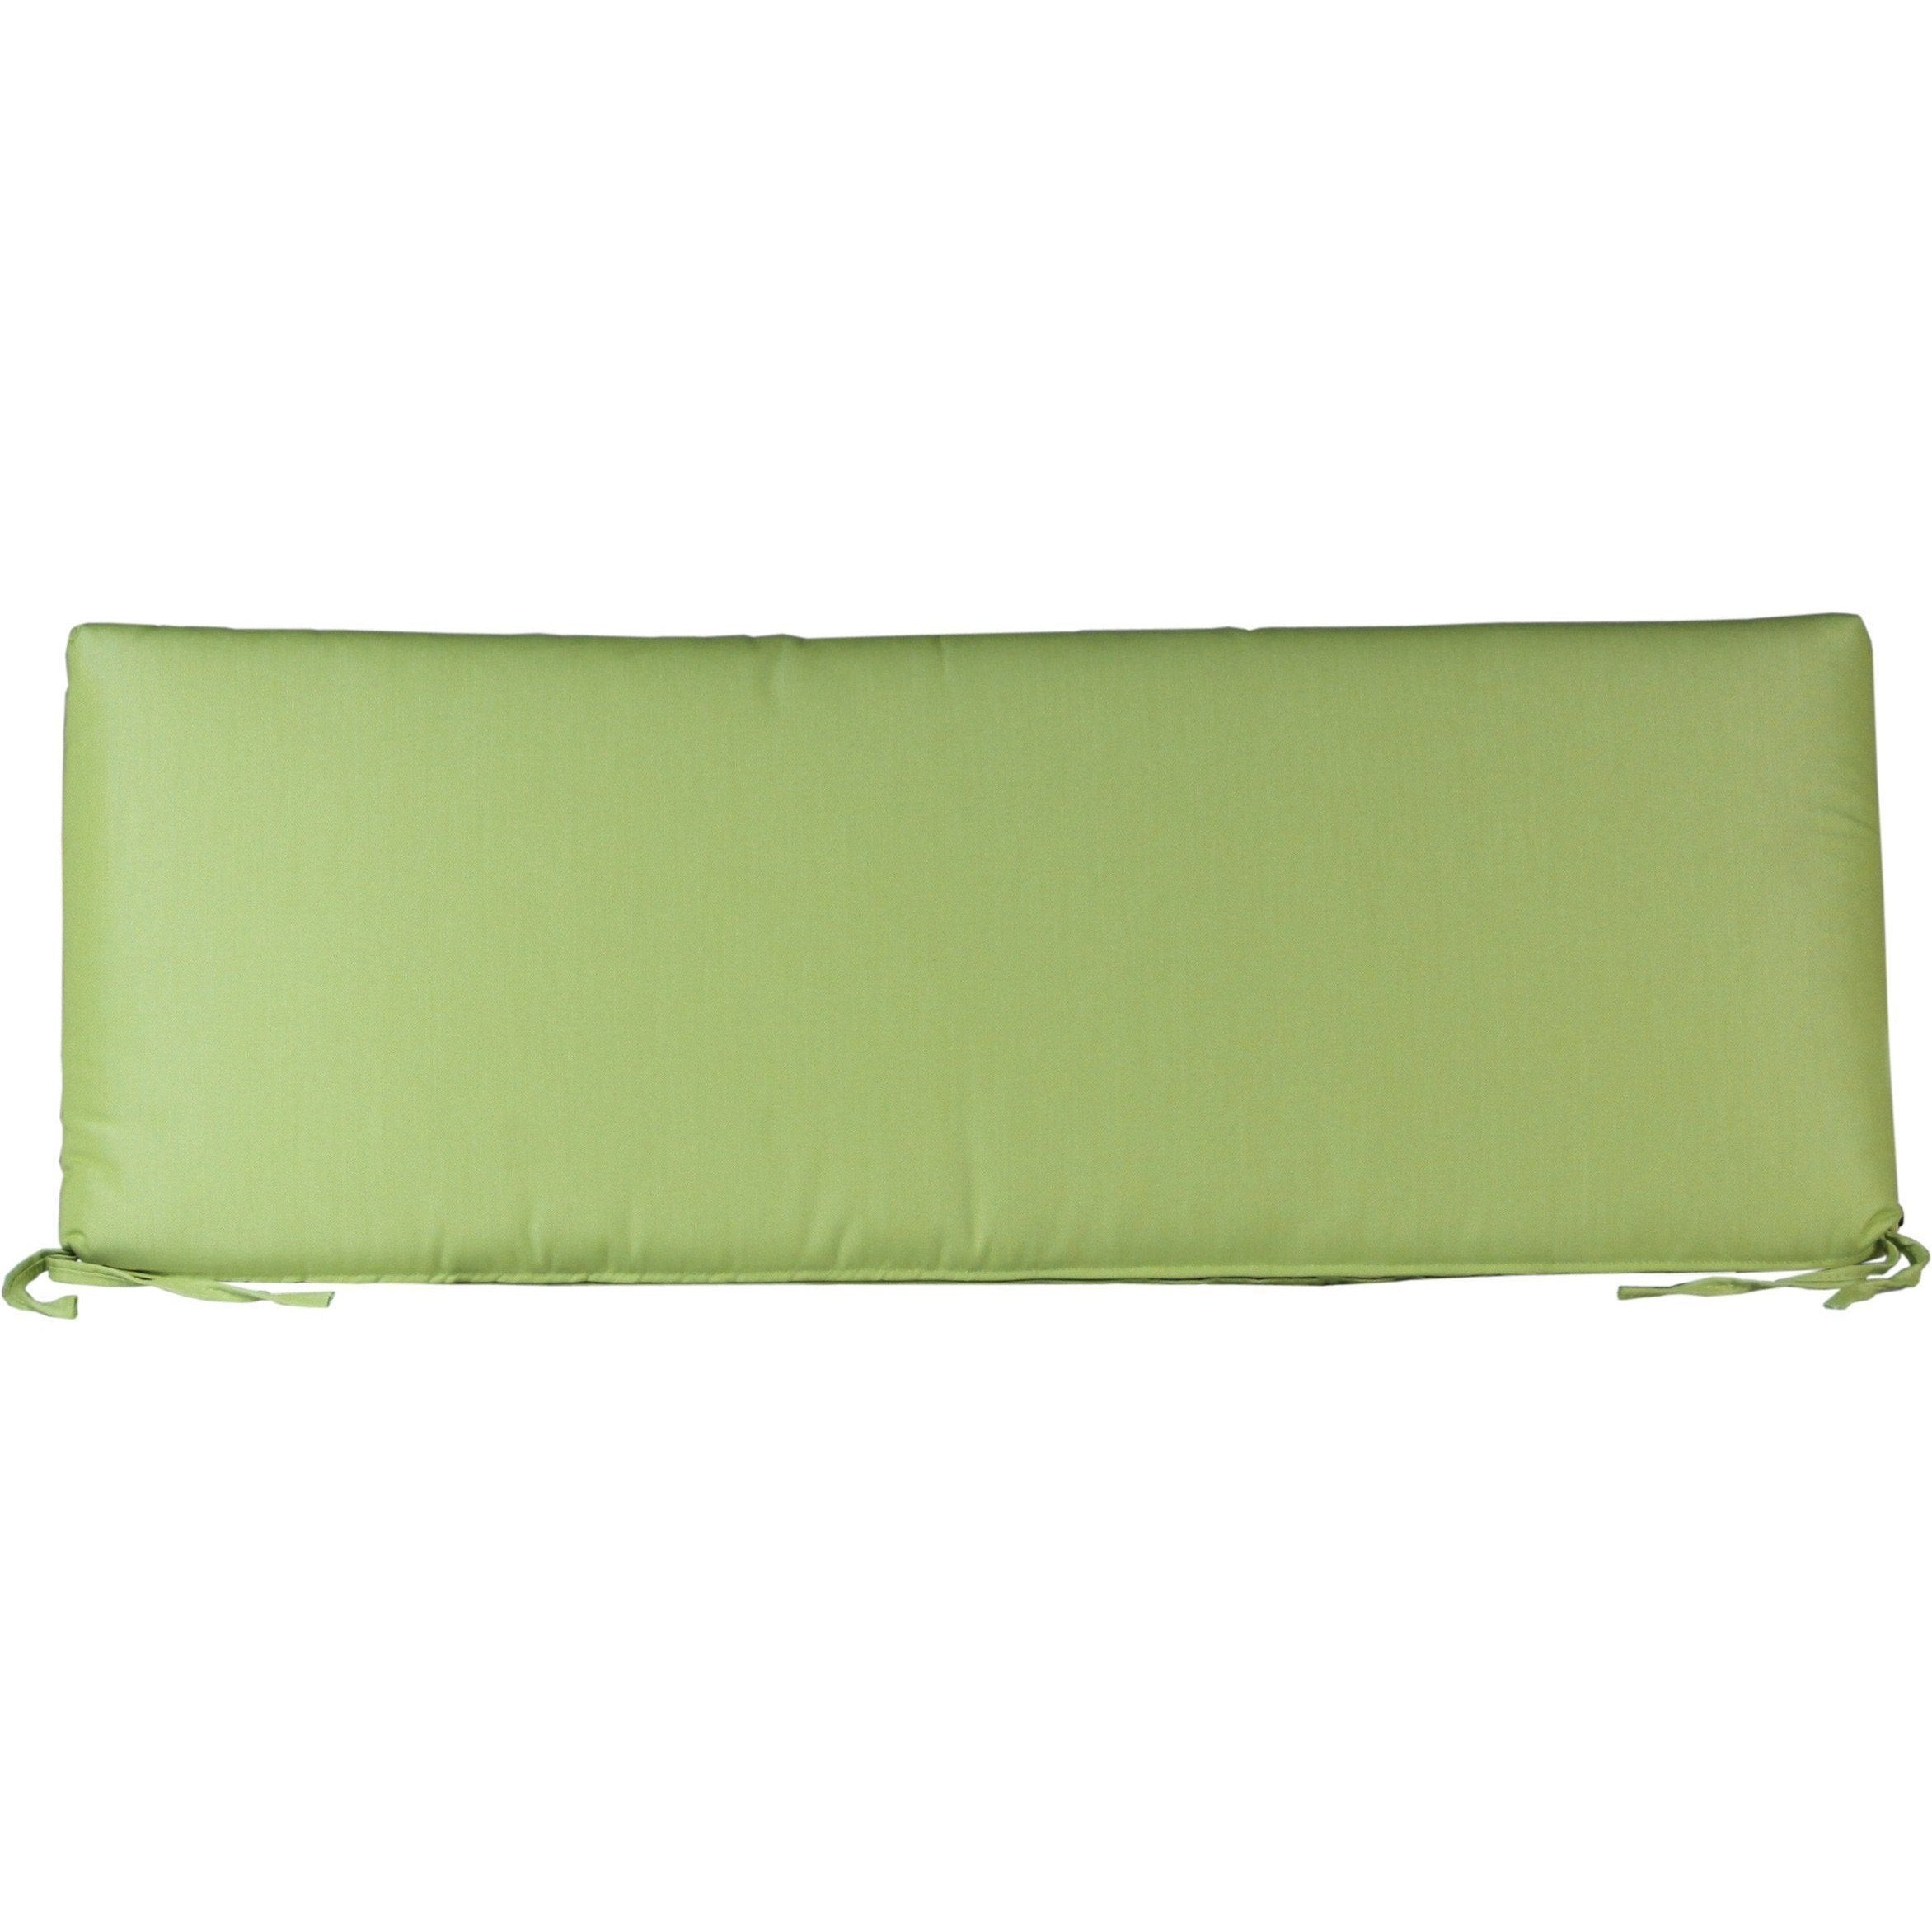 Outdoor 4' Seat Cushion Parrot